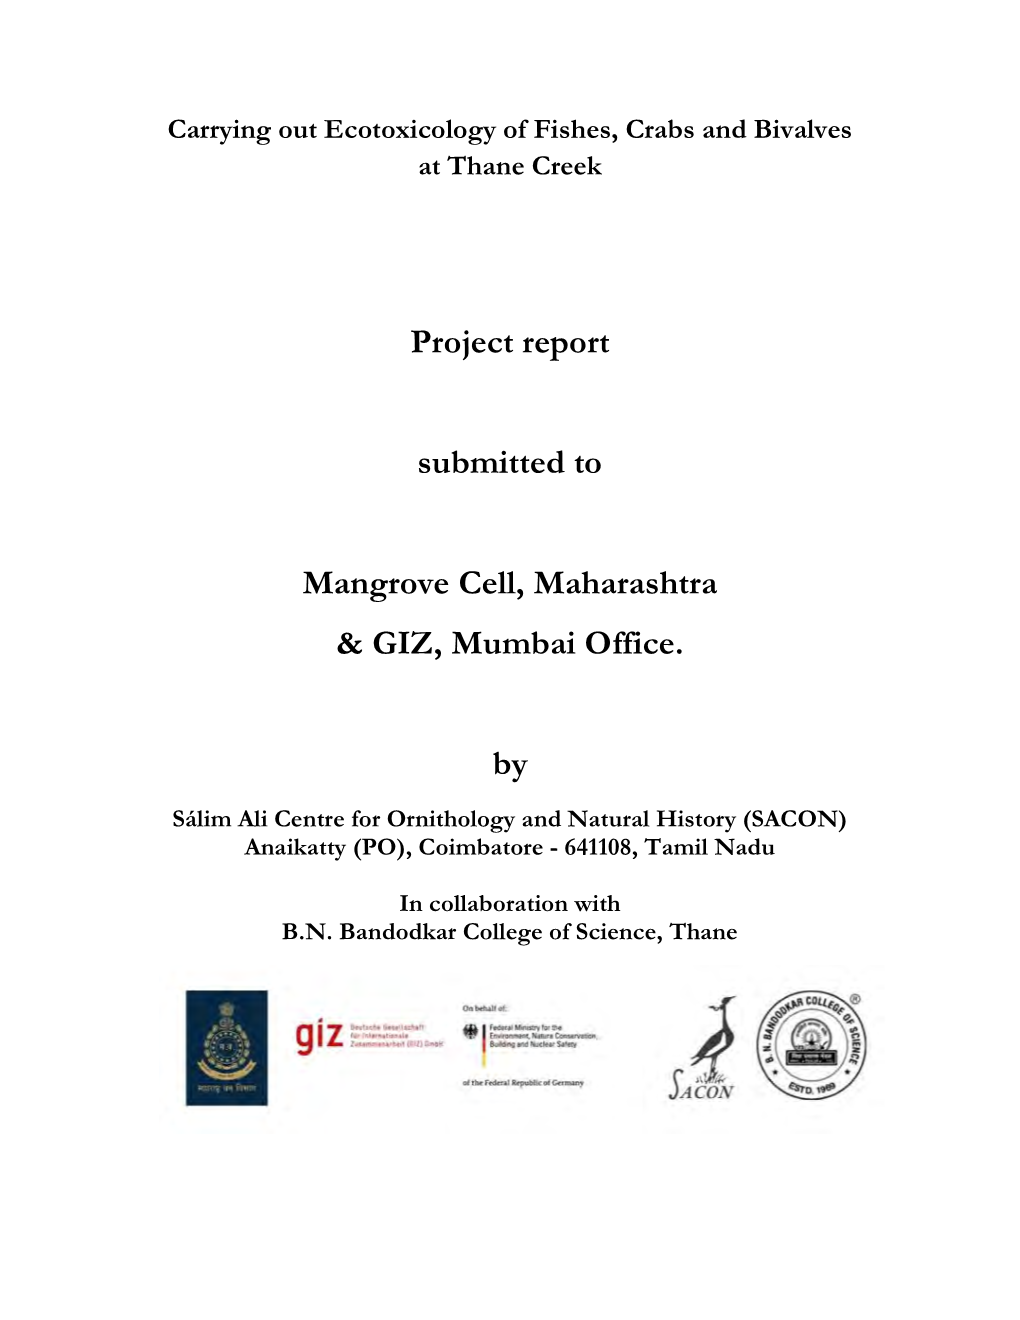 Project Report Submitted to Mangrove Cell, Maharashtra & GIZ, Mumbai